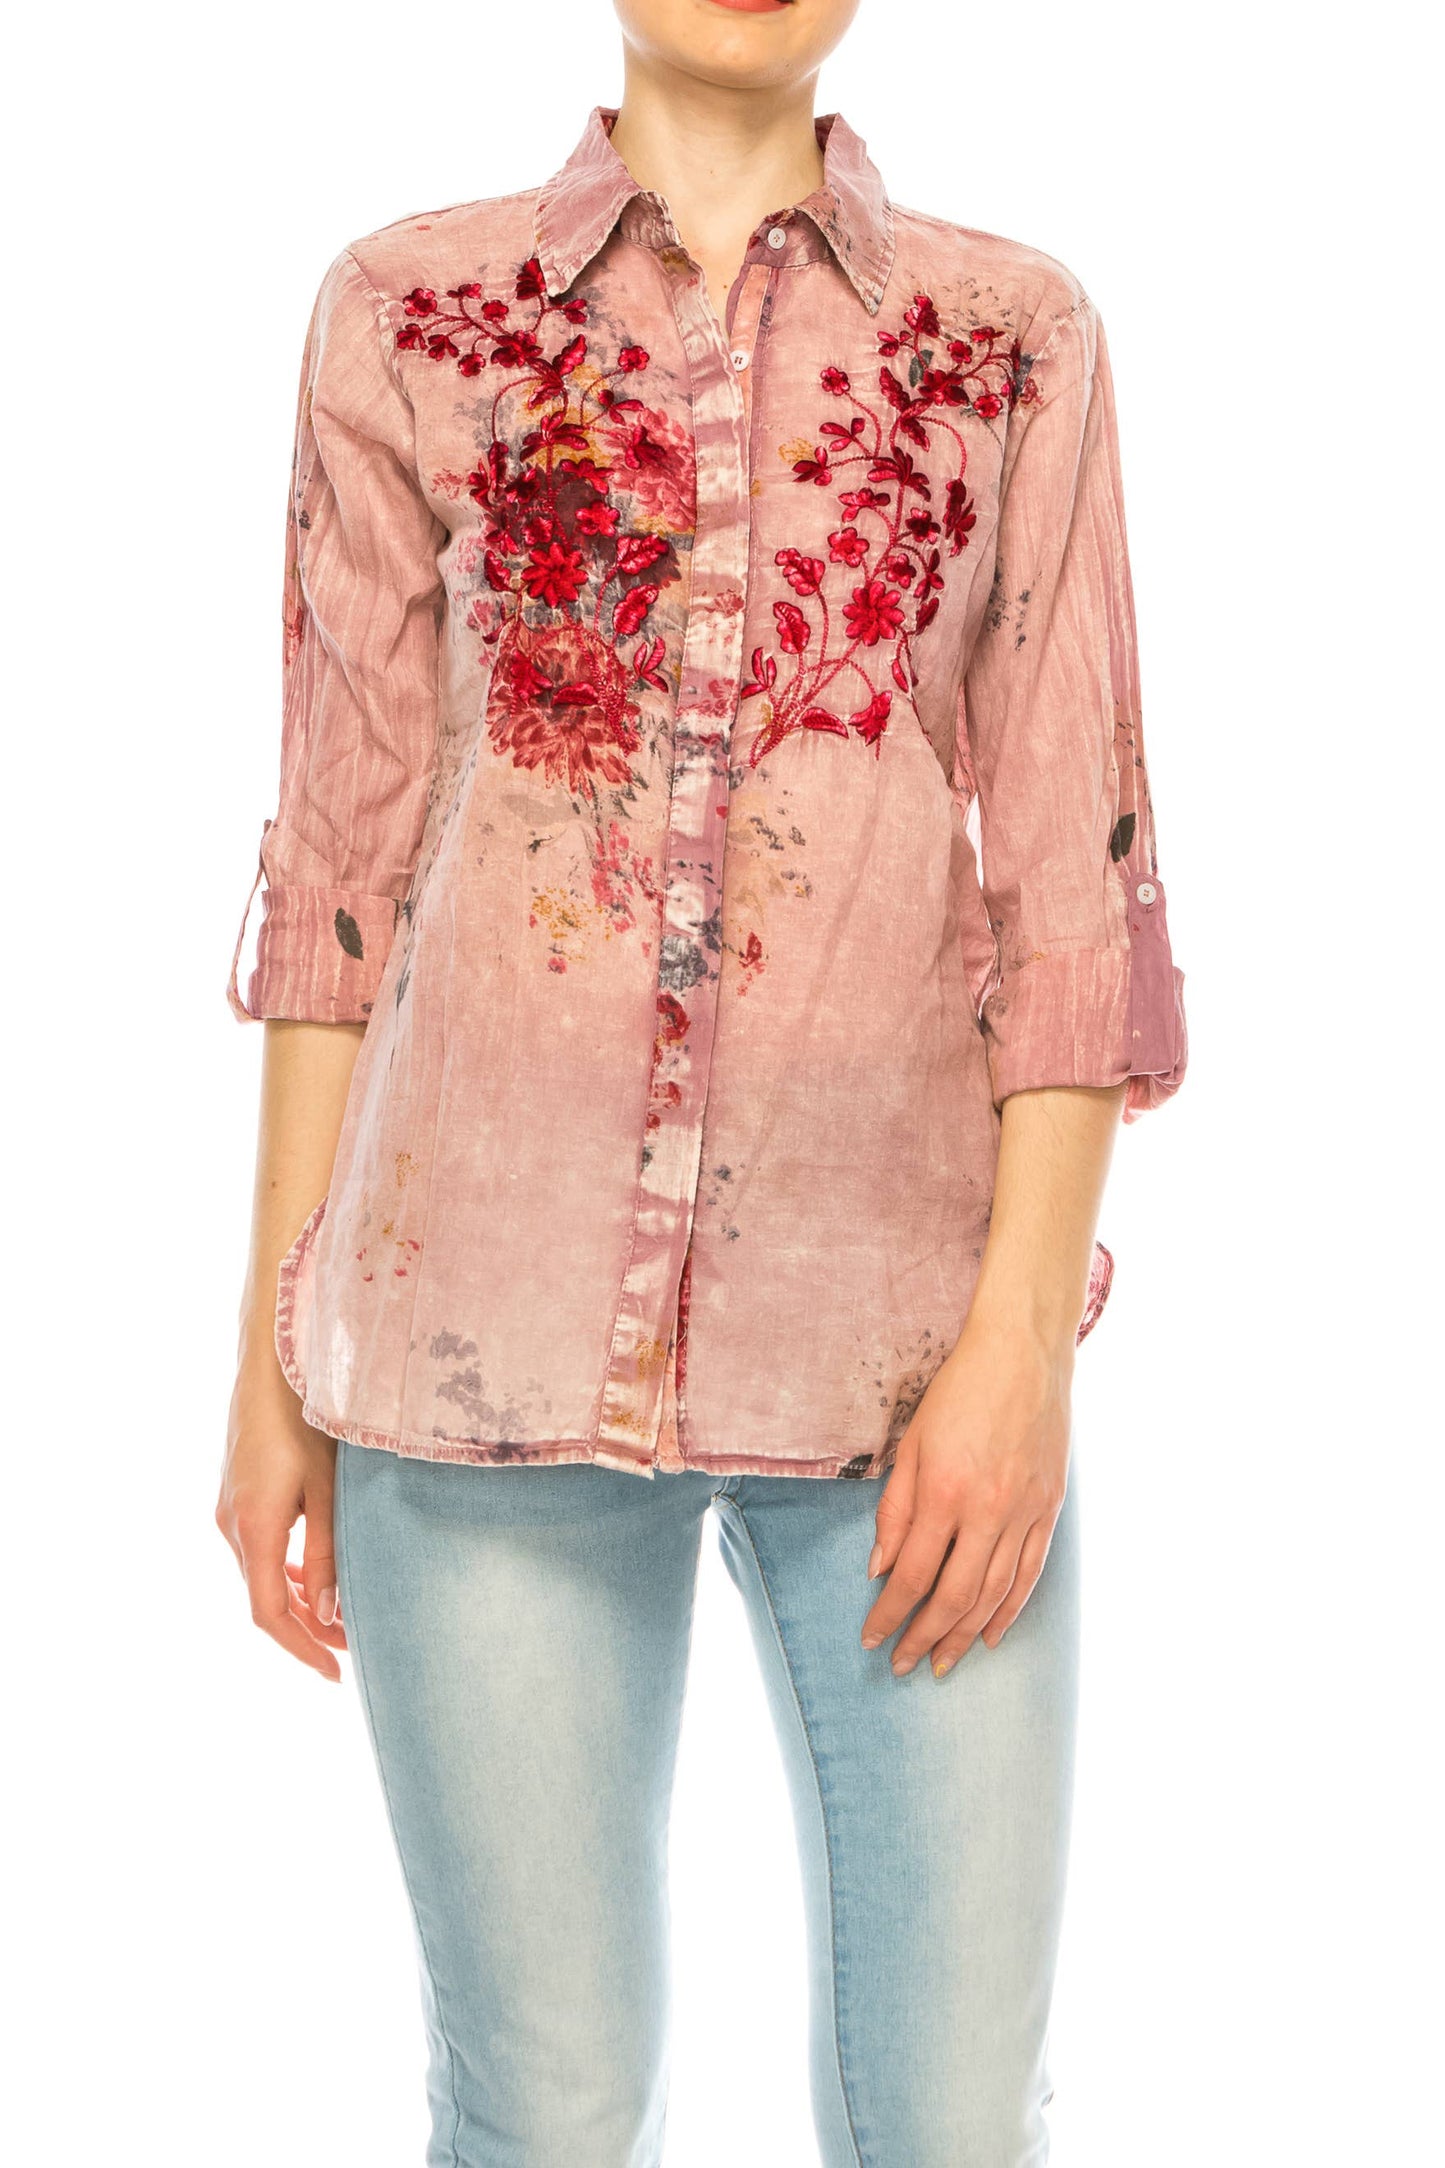 Magazine Clothing - Vintage Pink Floral Printed Shirt with Embroidery: X-Large